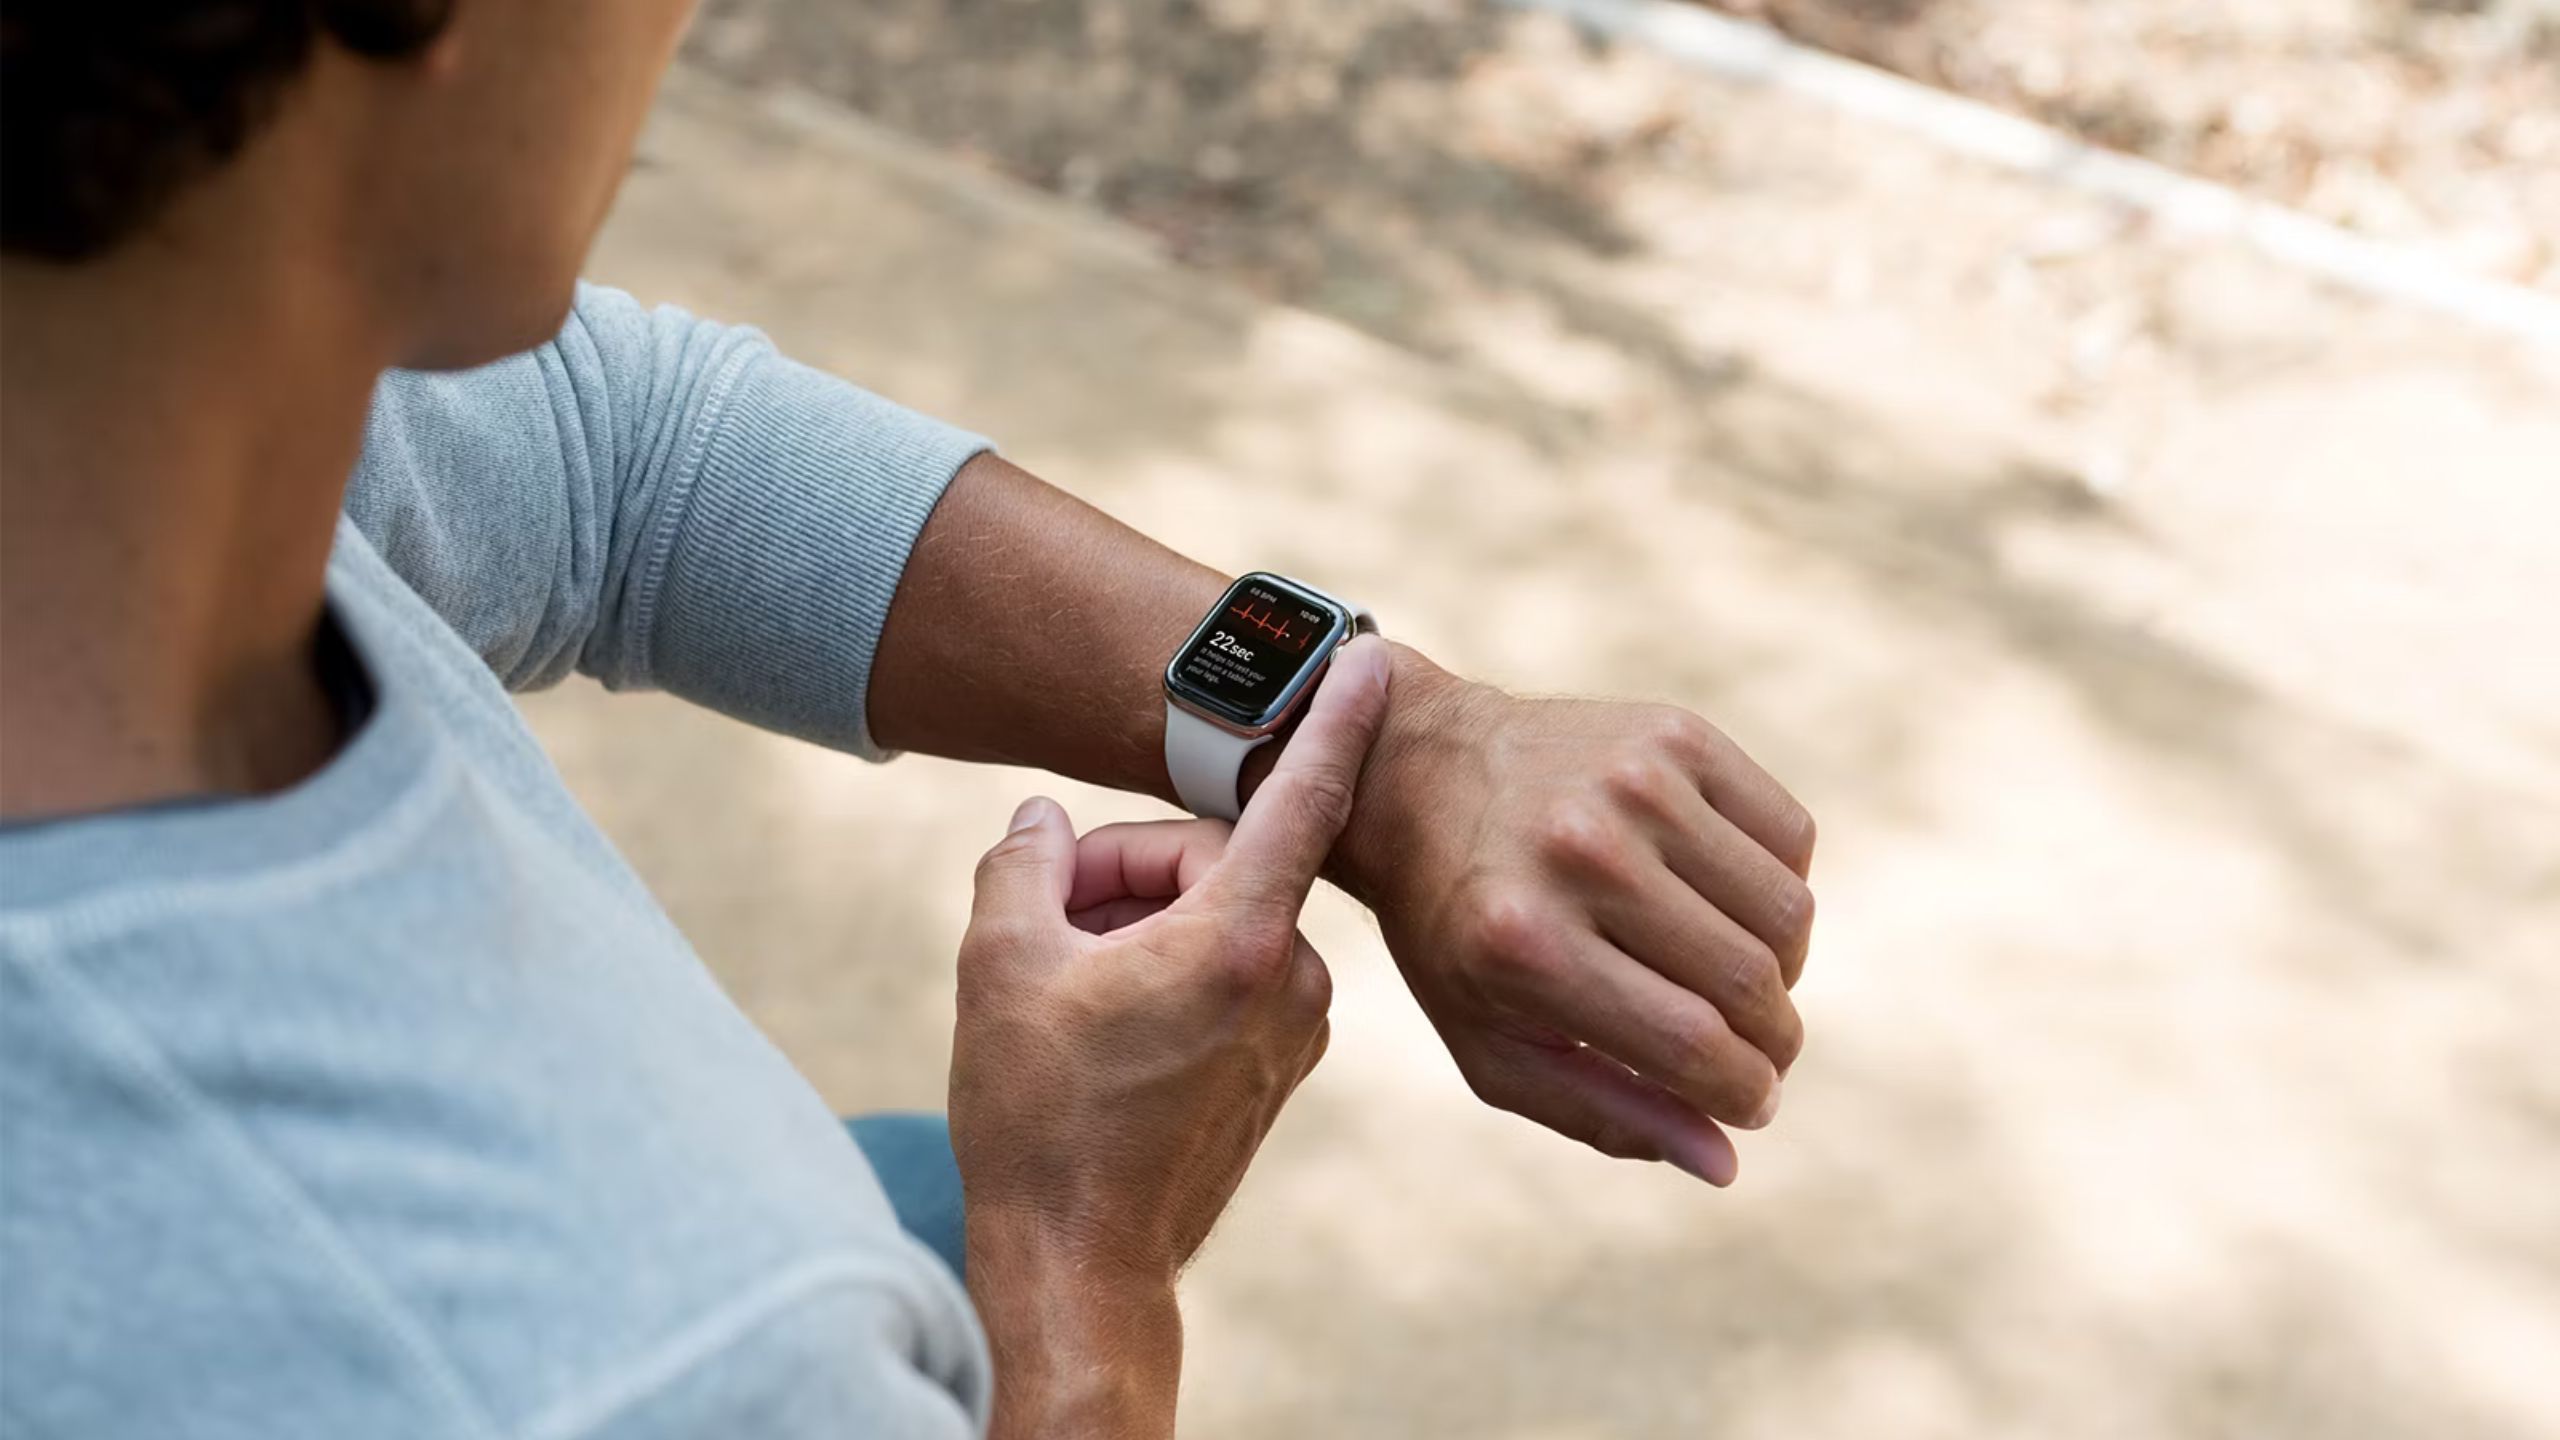 Apple Watch ECG feature hitting side button